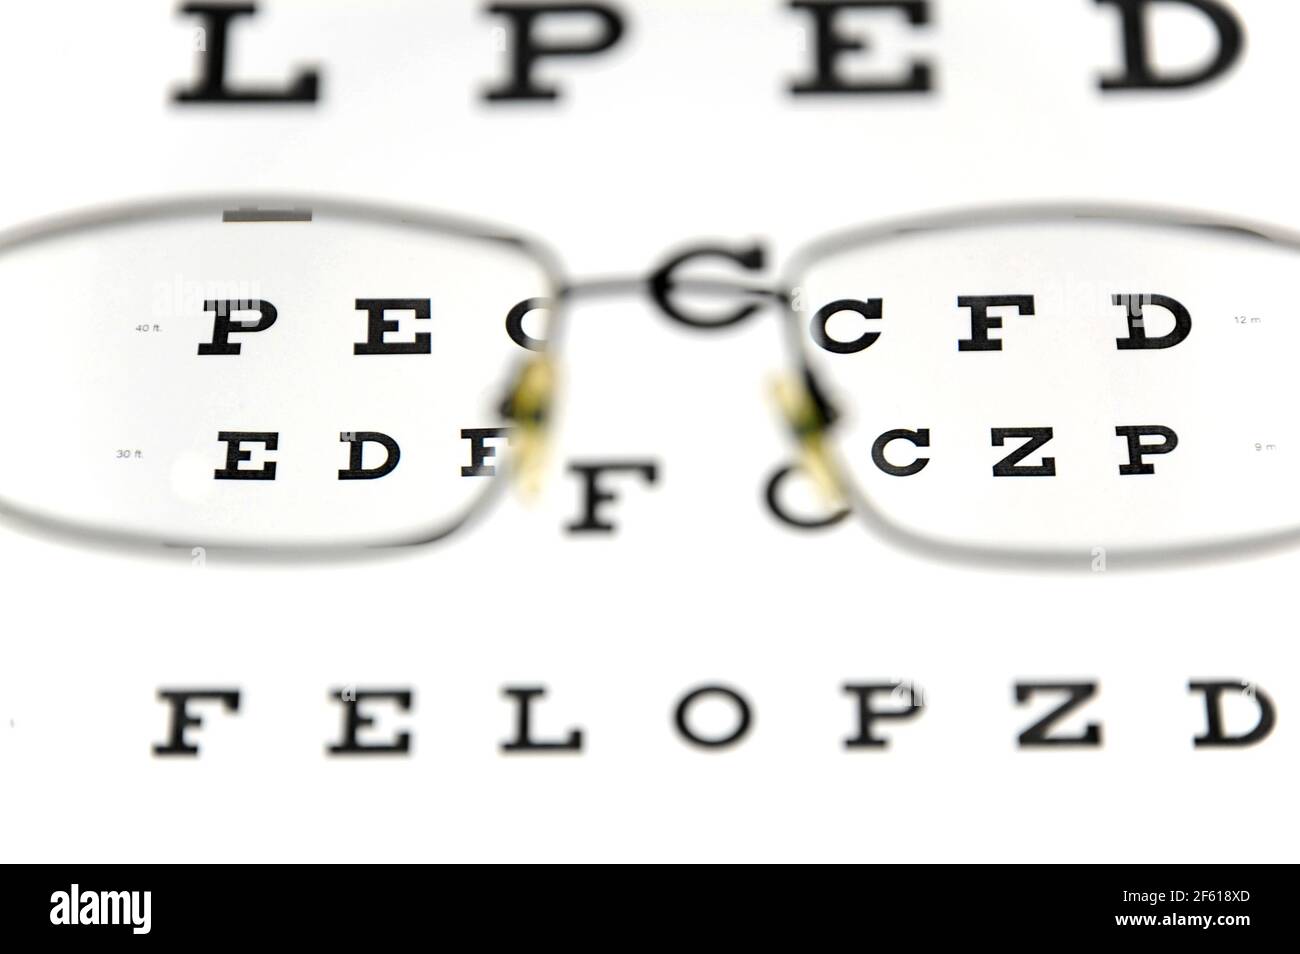 Eyeglasses and snellen eye chart. The eye test chart is shown blurred in the background. Visual Acuity Testing (Snellen Chart). Stock Photo